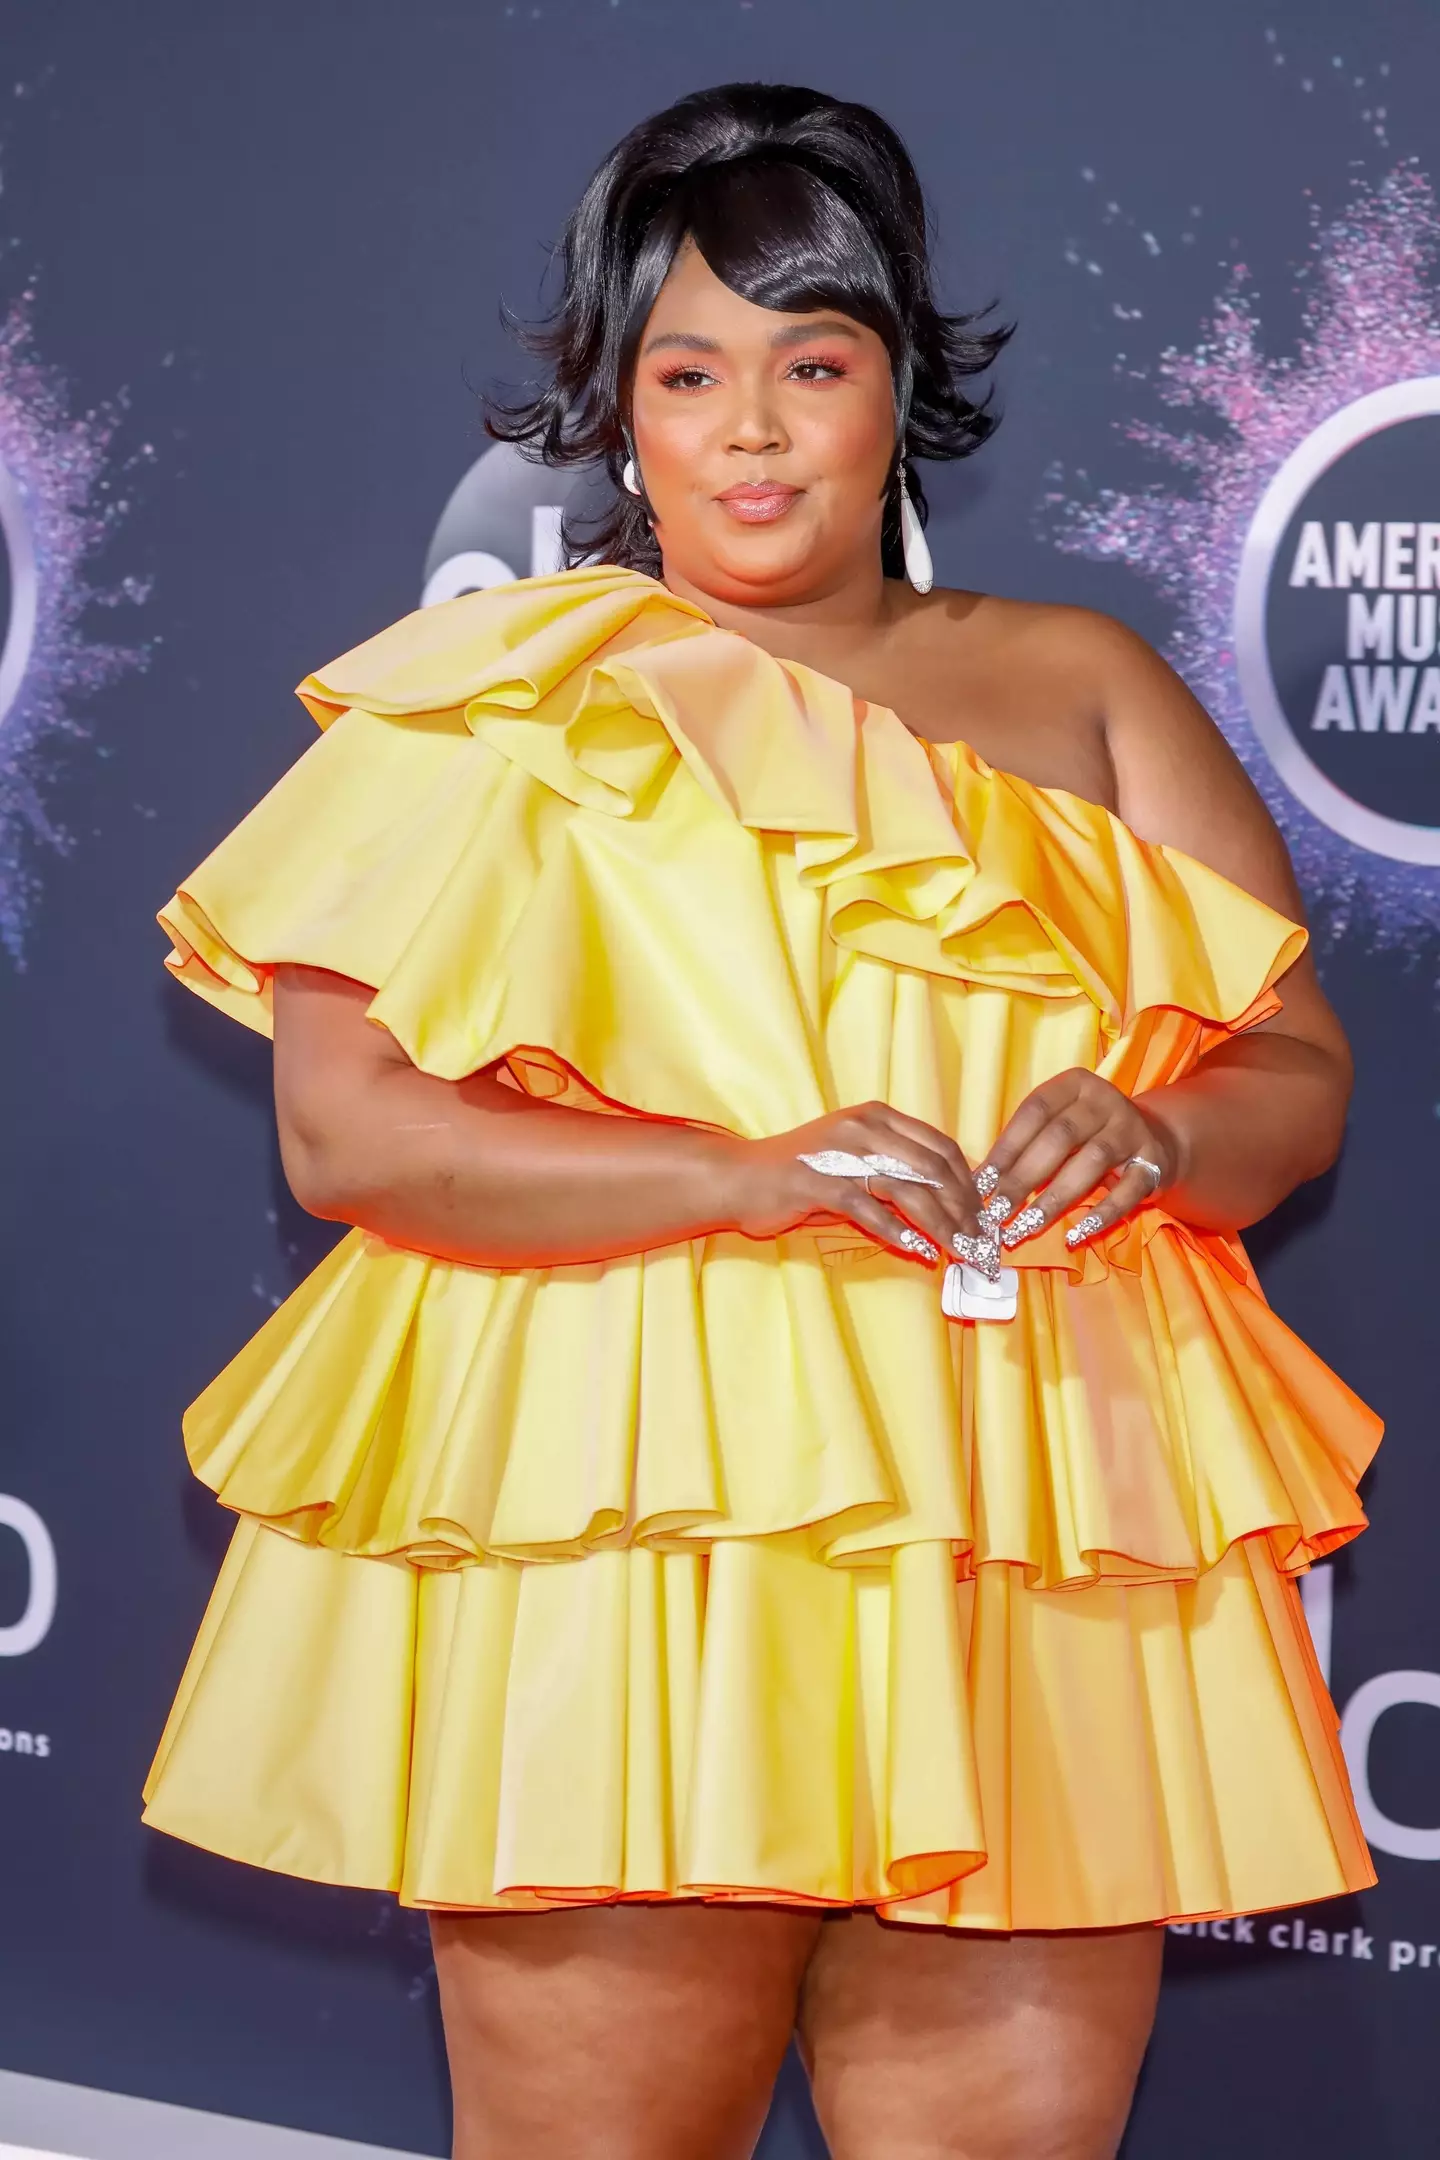 Lizzo has not publicly spoken about what happened.